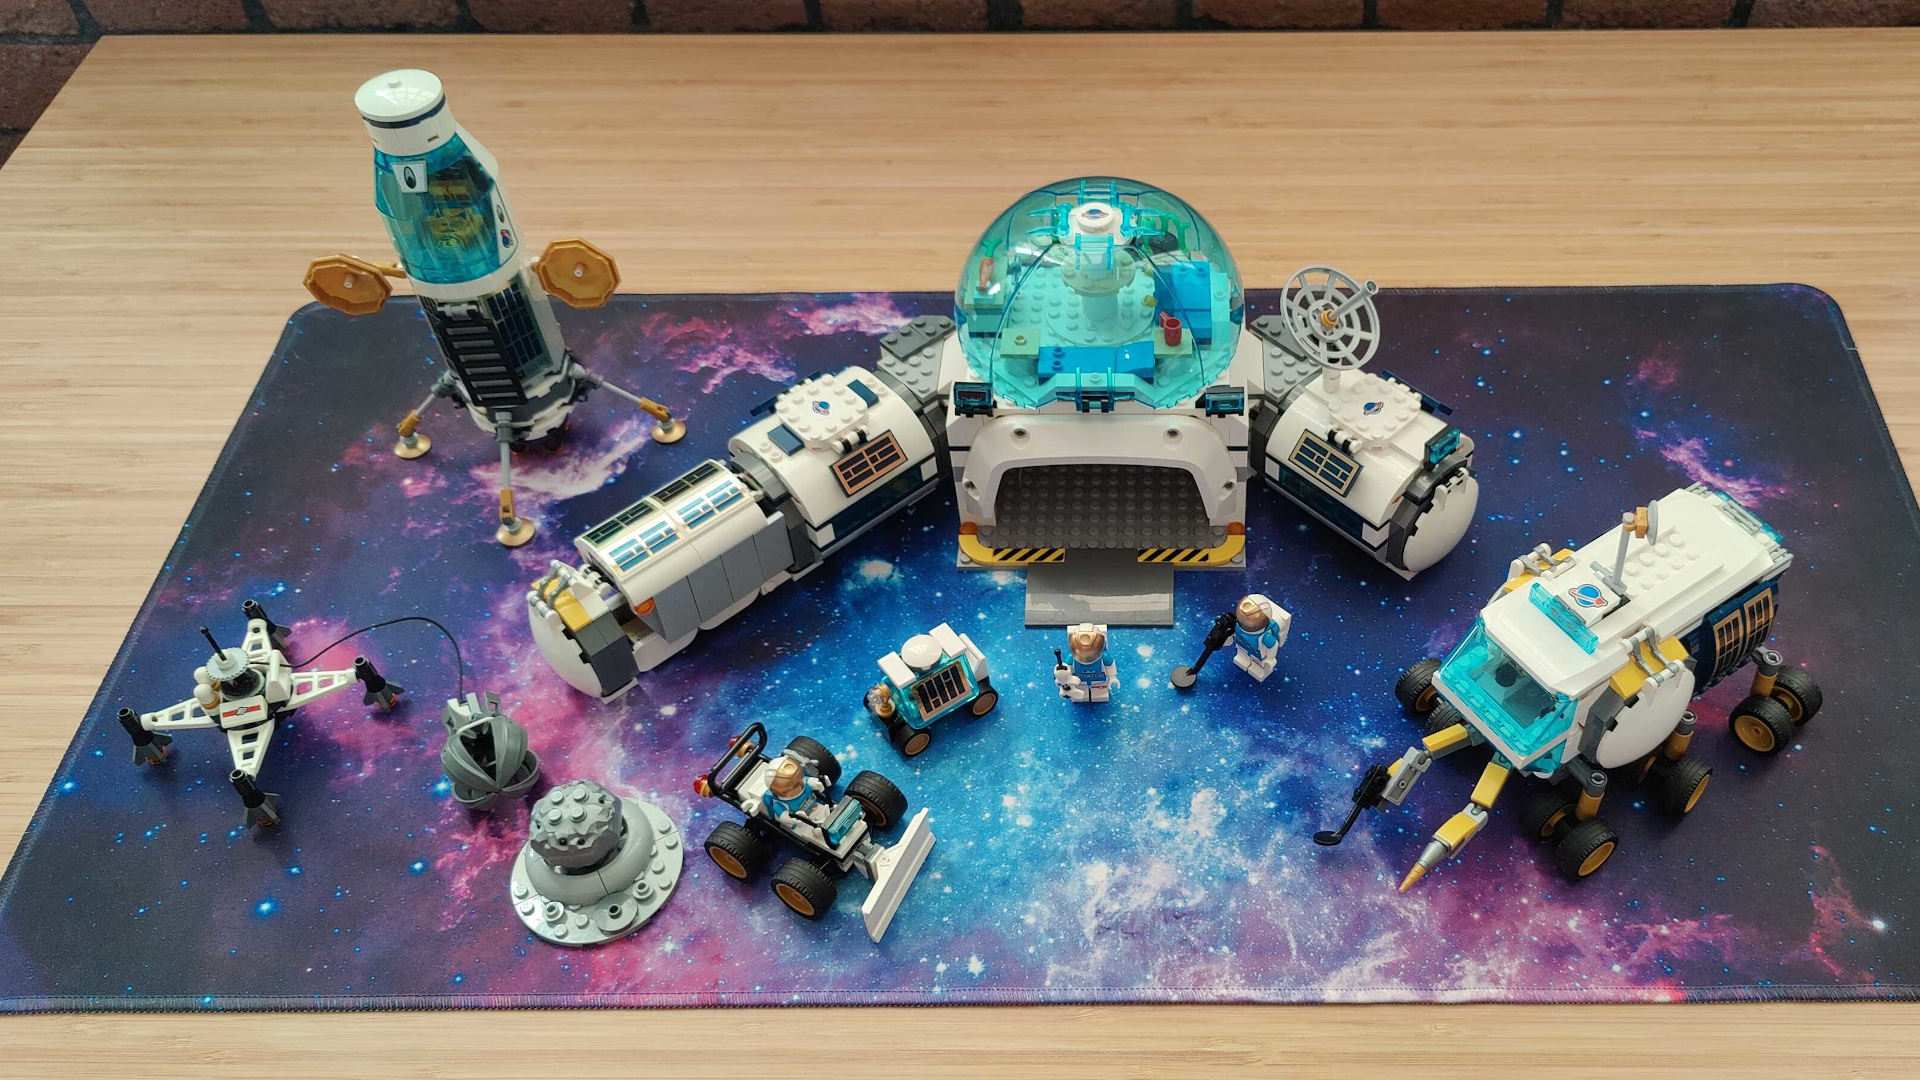 Blast off for less with 20% off LEGO City Lunar sets at Walmart